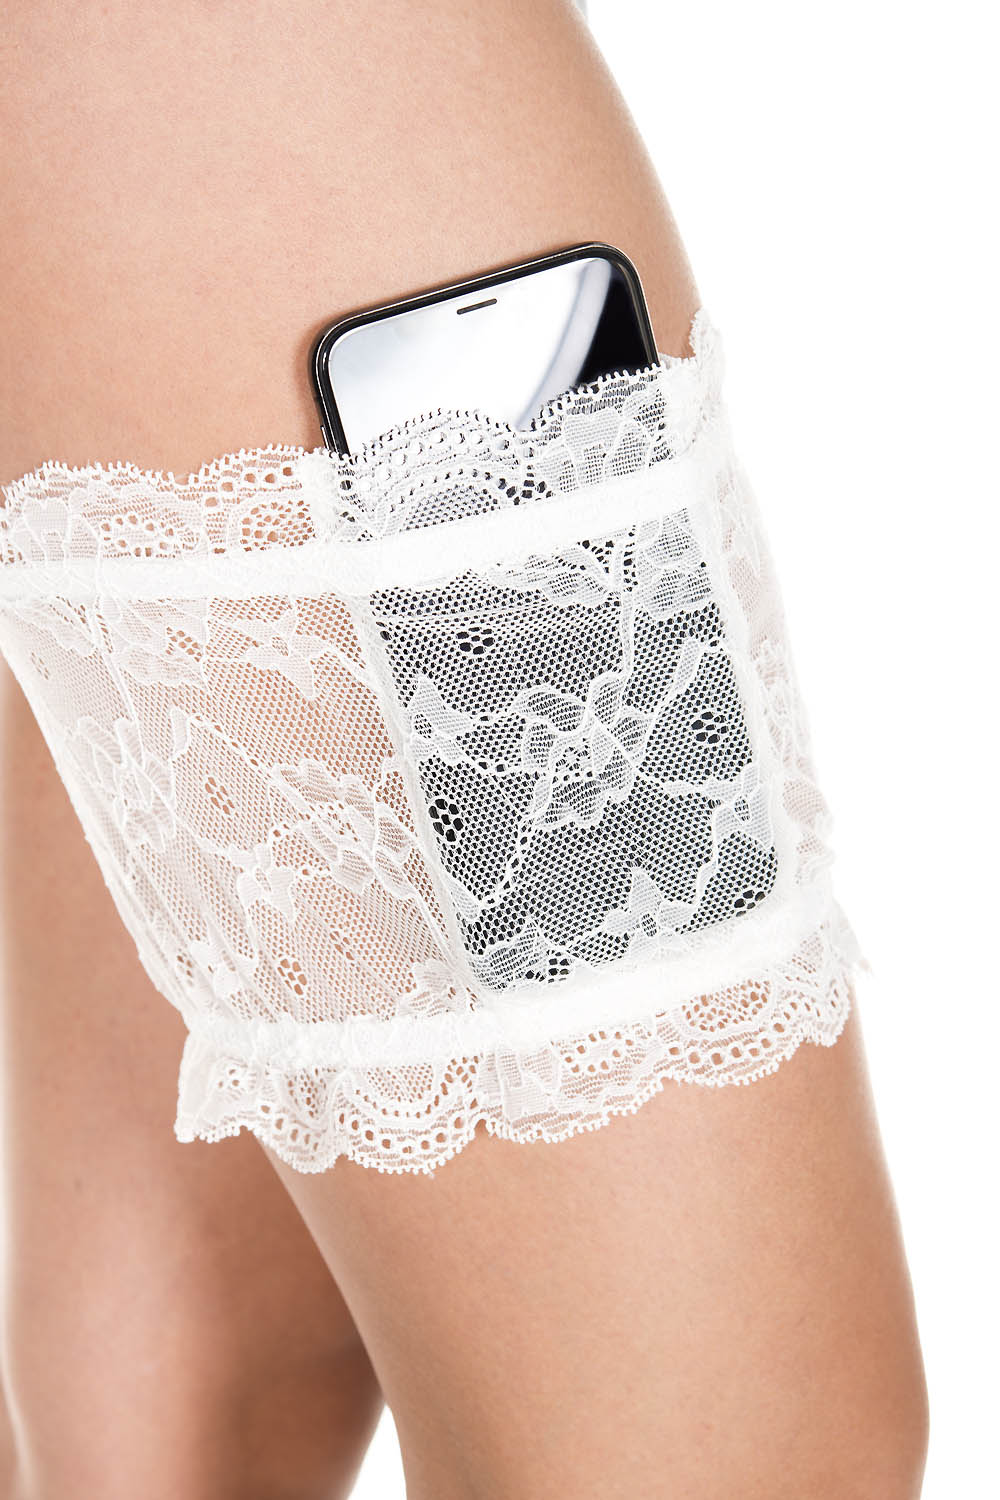 Music Legs 43004 Lace Garter Pocket - White floral lace thigh band (garter) with elasticated edge and a strip of silicone, 2 internal pockets, one pocket is perfect for storing your phone or insulin pump and the other for a key or money notes.